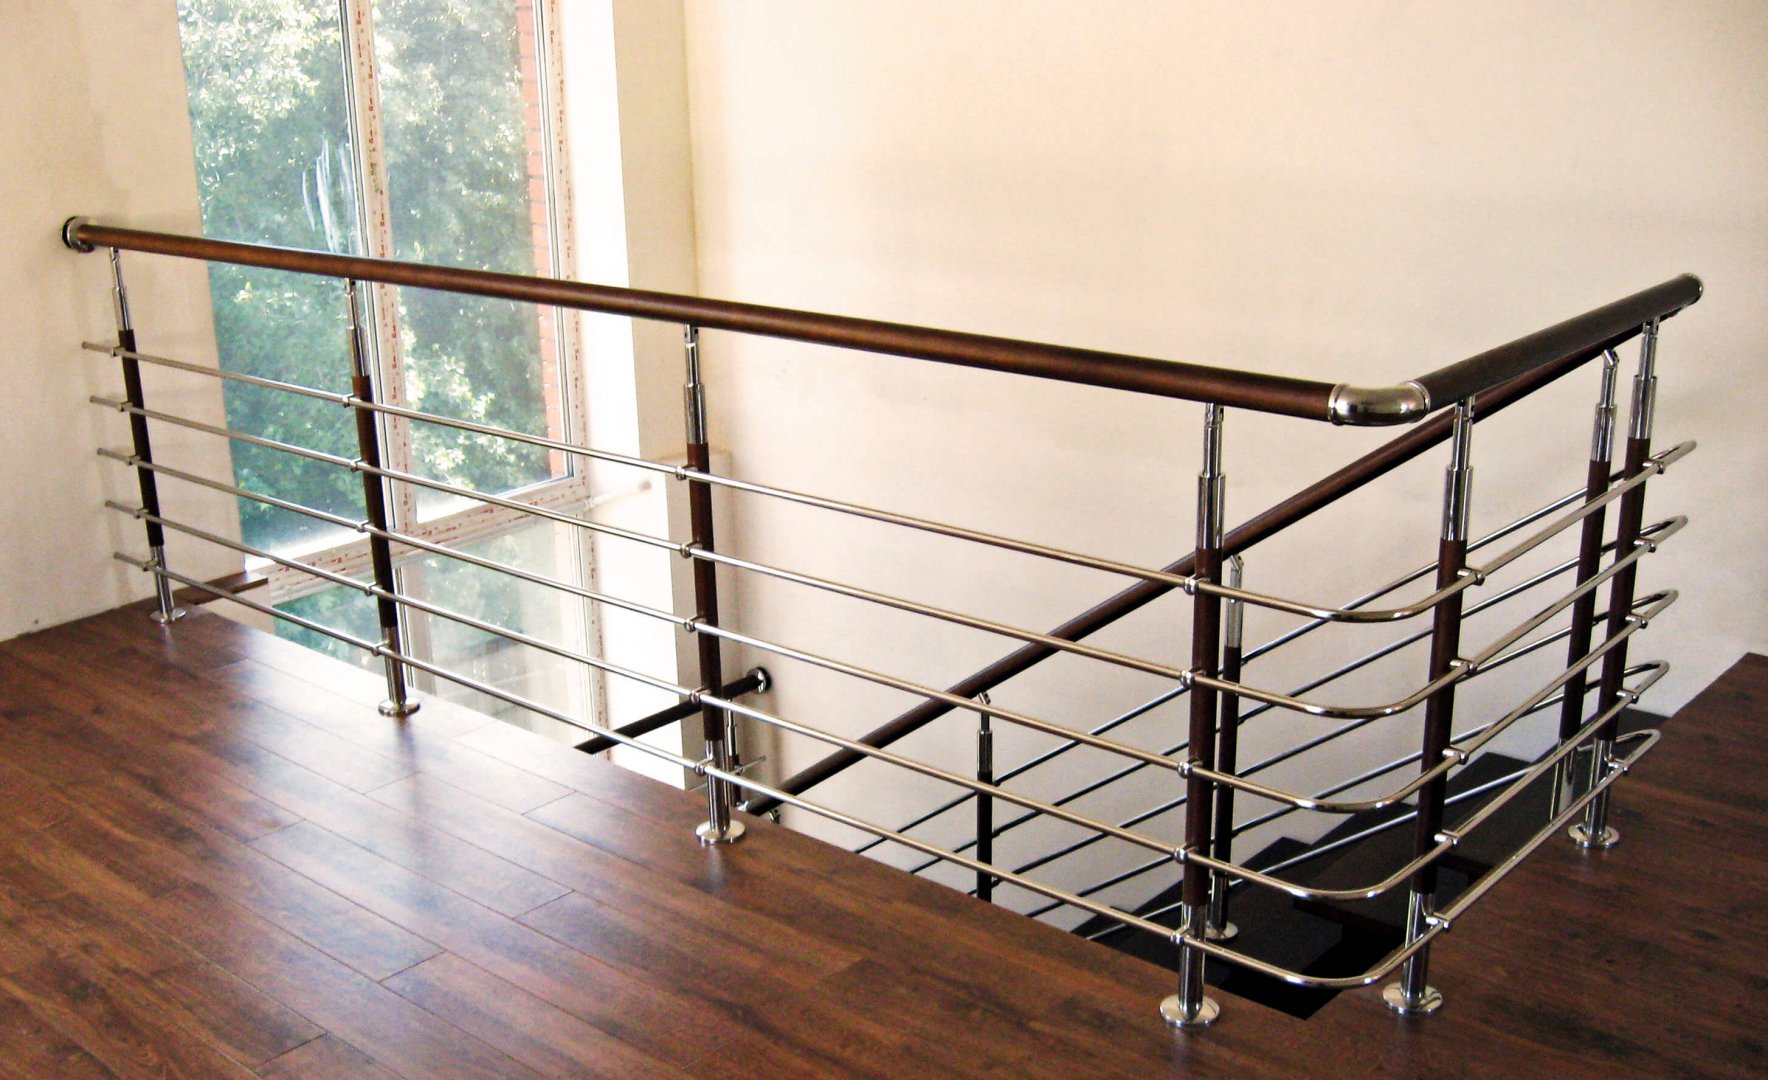 Benefits of stainless steel handrails